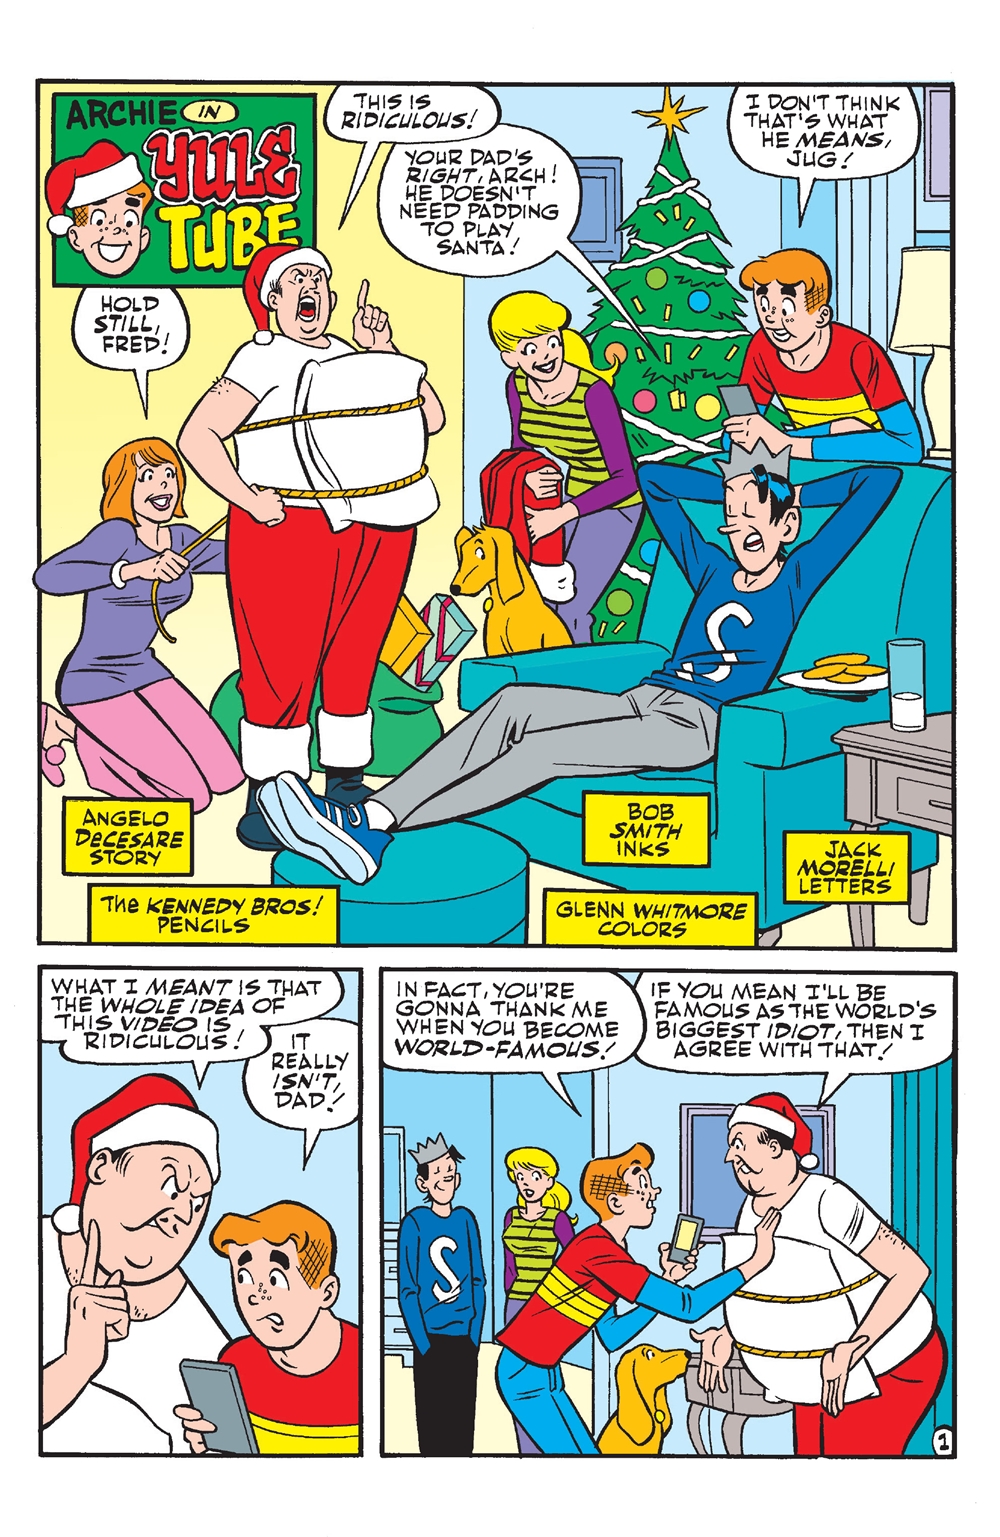 Archie%2527s%2BChristmas%2BSpectacular%2B2020%2B001-013